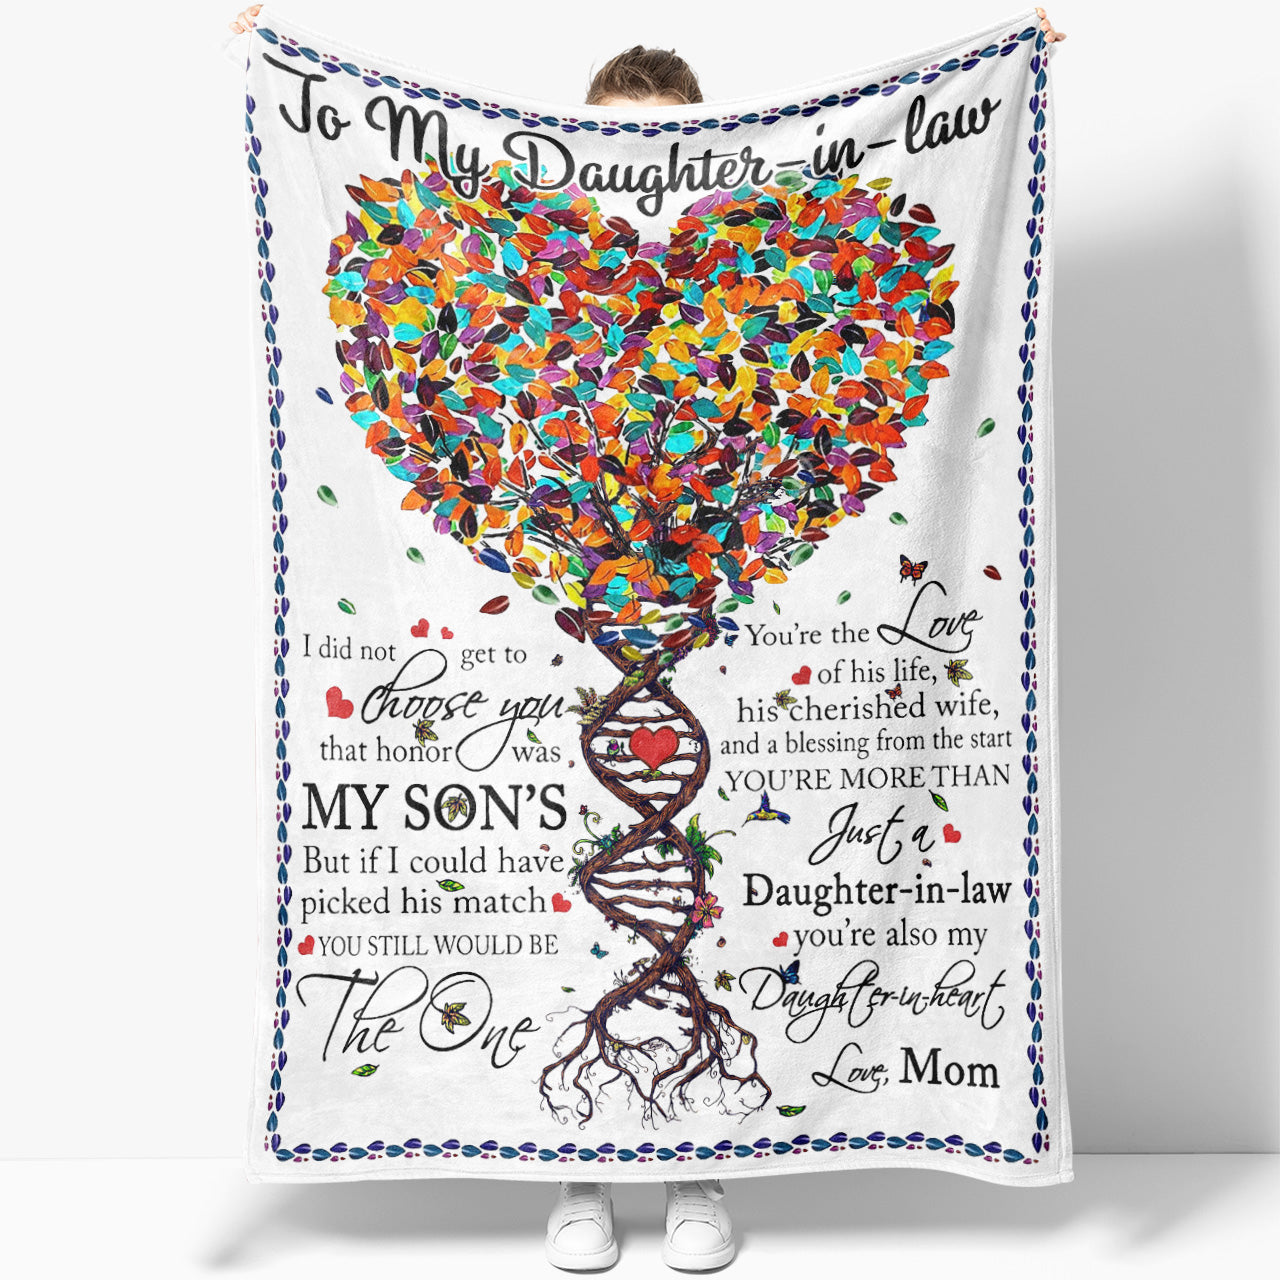 Blanket Gift Ideas For Daughter in Law, Custom Personalized Blanket Gift, Tree of Life